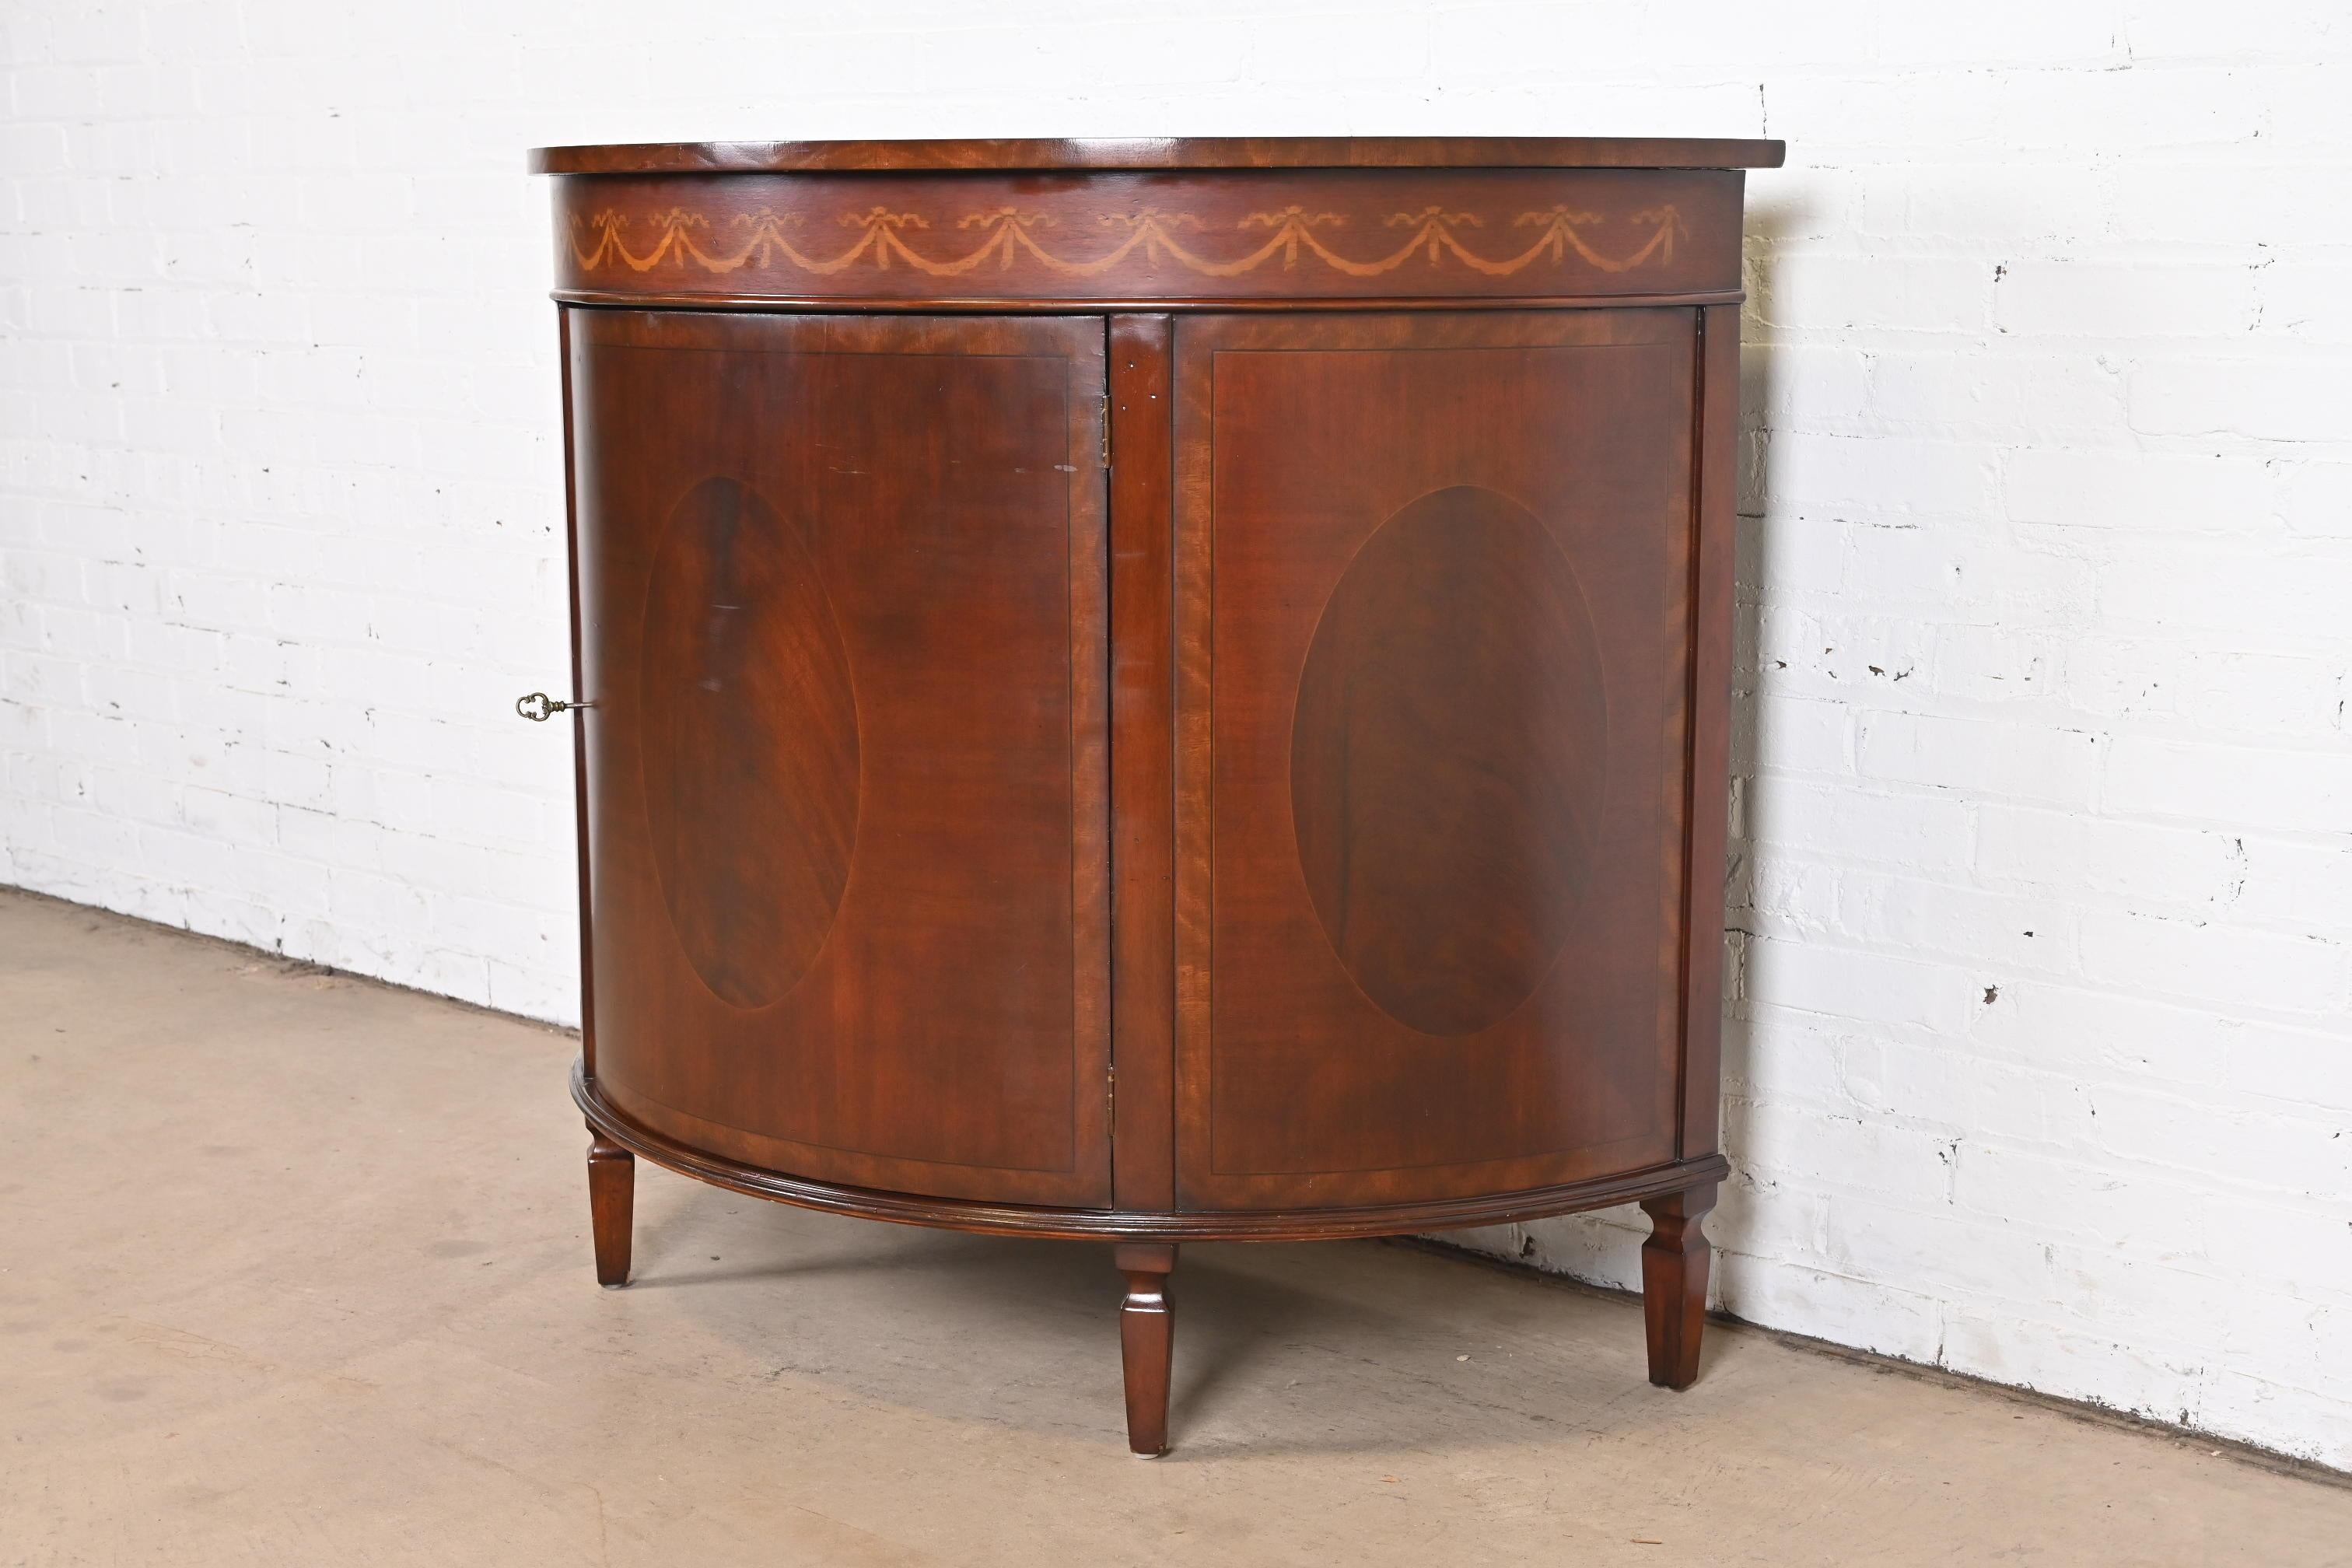 20th Century Georgian Inlaid Mahogany Demilune Cabinet in the Manner of Baker Furniture